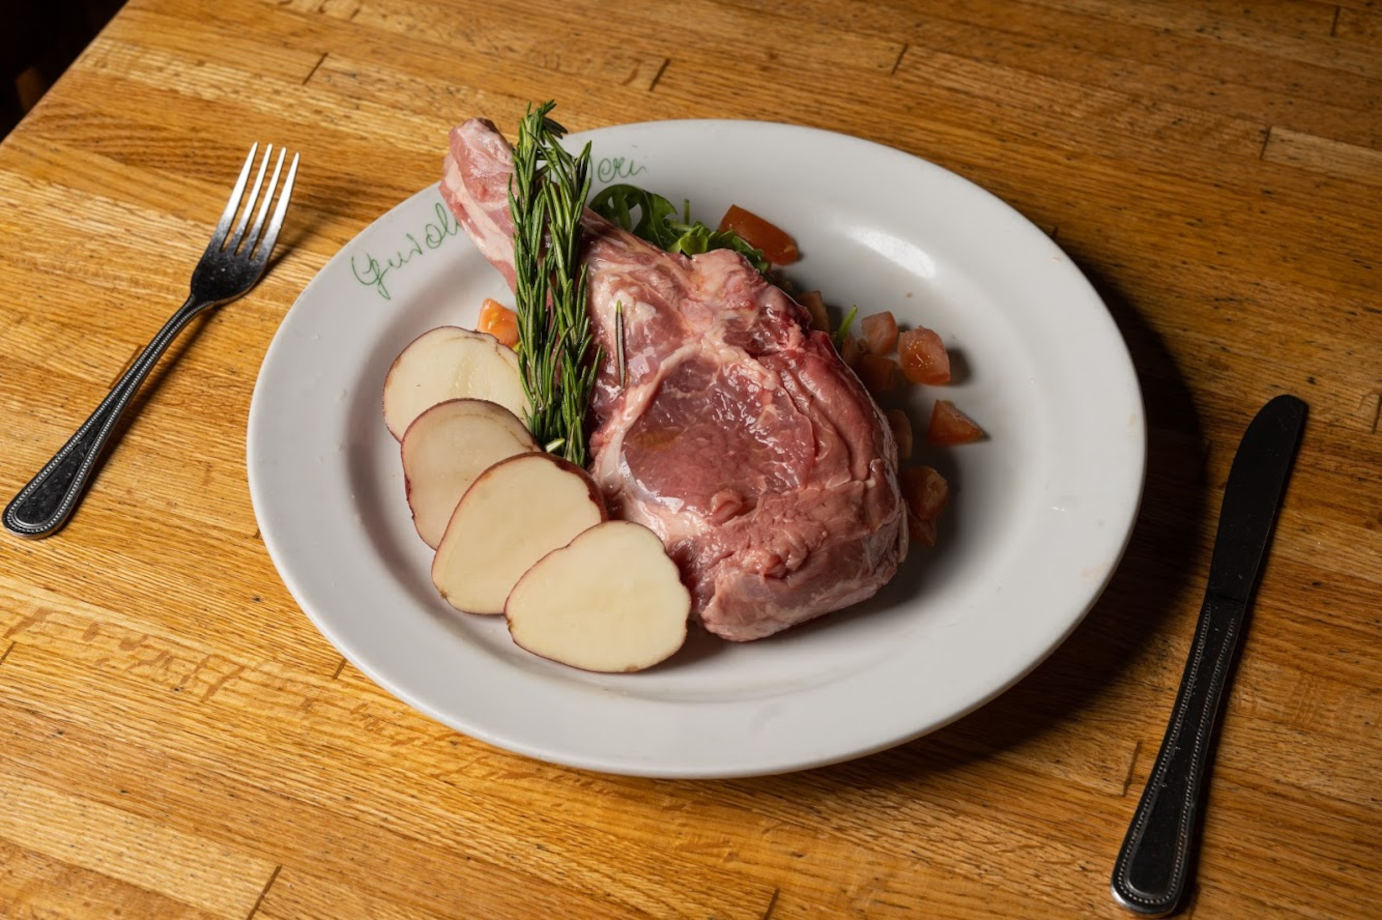 Raw chop with rosemary and potatoes on the plate